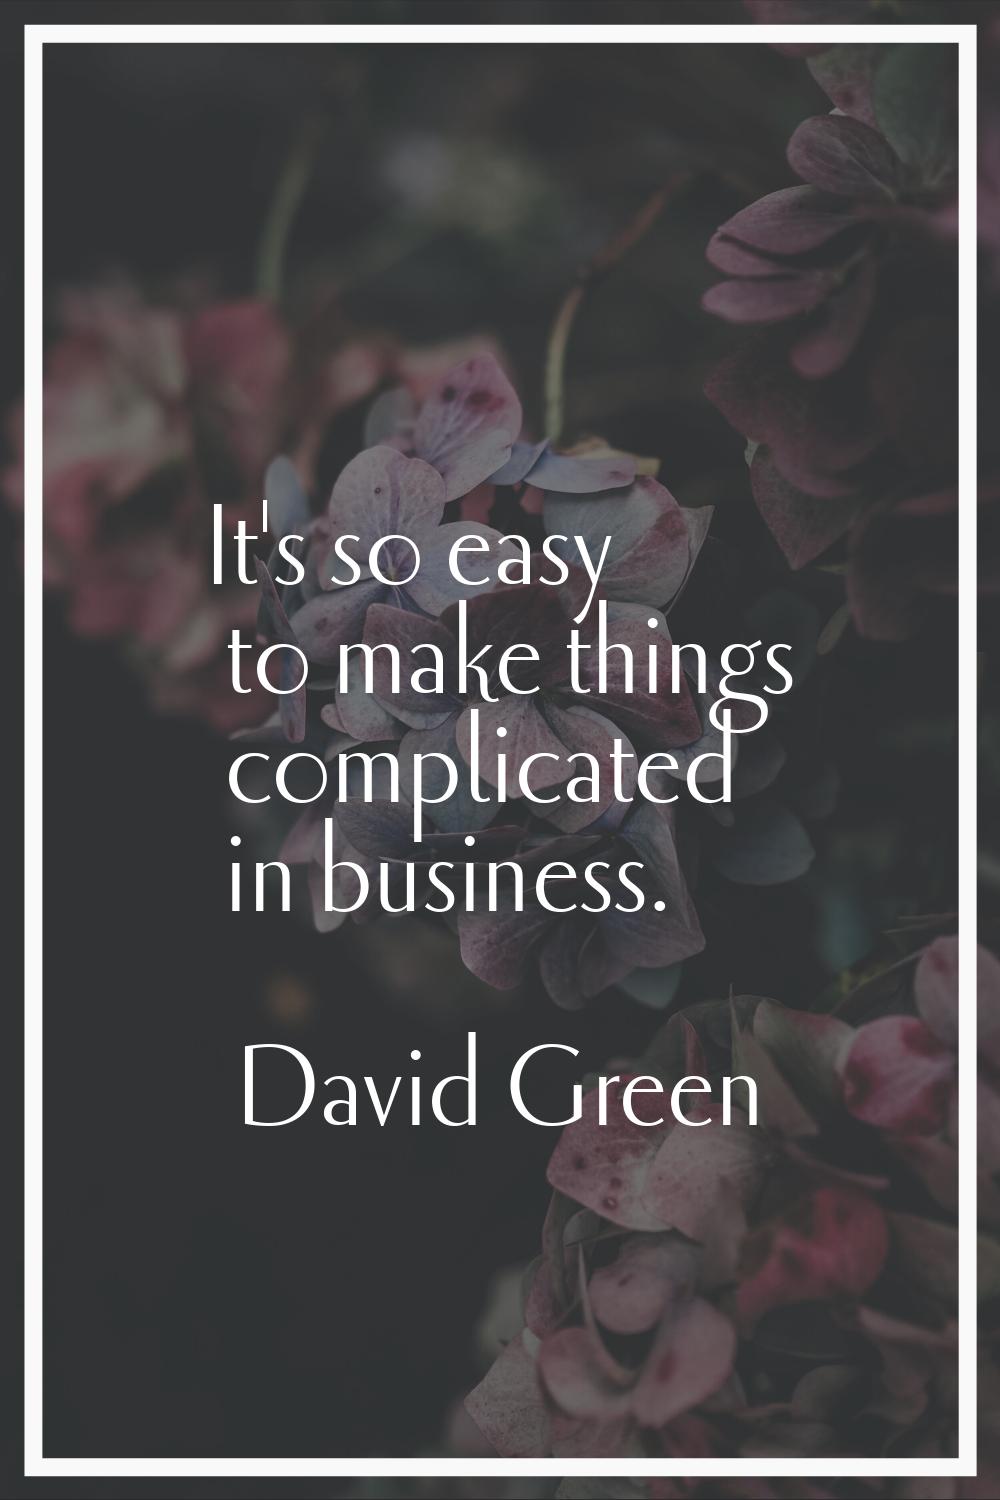 It's so easy to make things complicated in business.